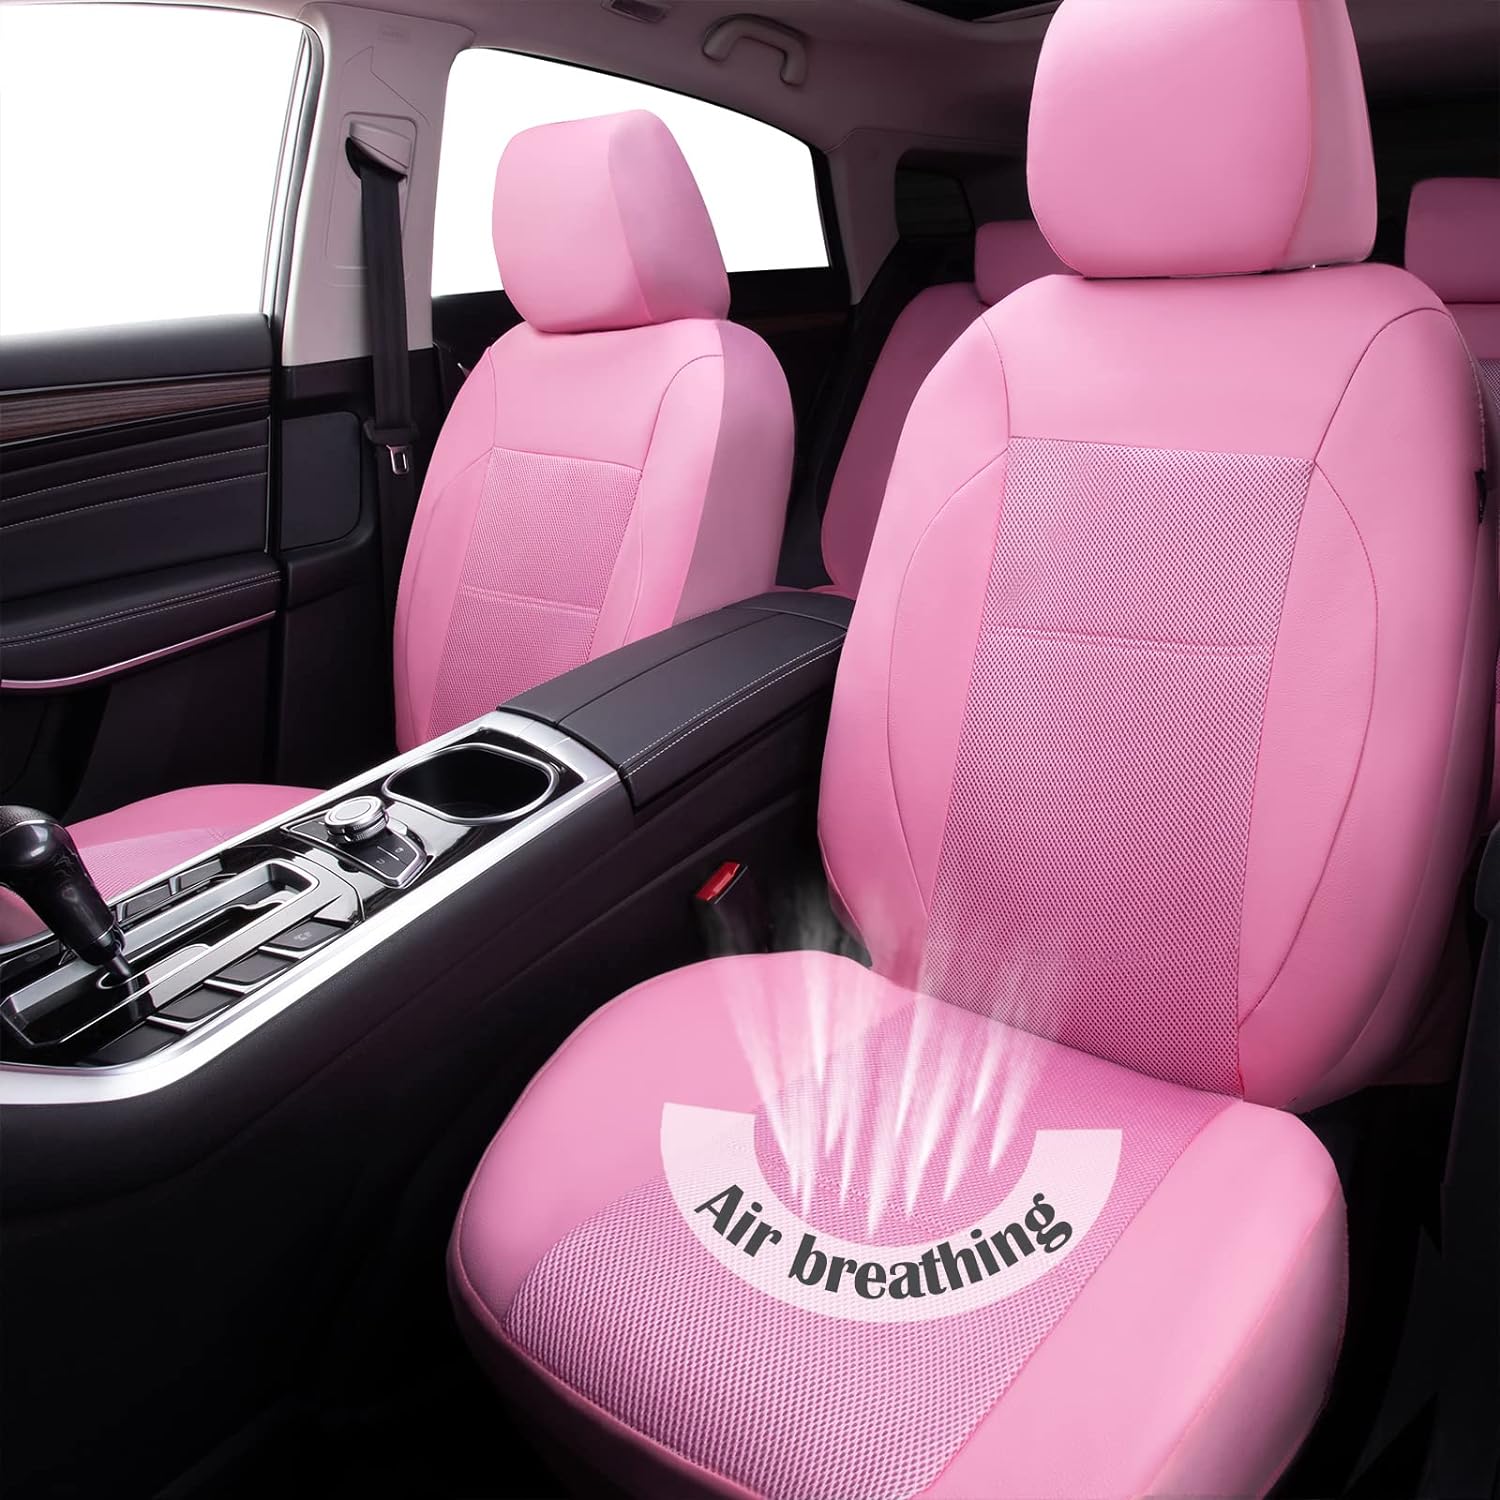 CAR PASS Barbie Pink Leather Seat Cover Automotive Breathable Universal Car Seat Cover Set Package-Super 5mm Sponge Inside,Airbag Compatible, Interior Cover Cute for Women Car Truck Van (Pink)